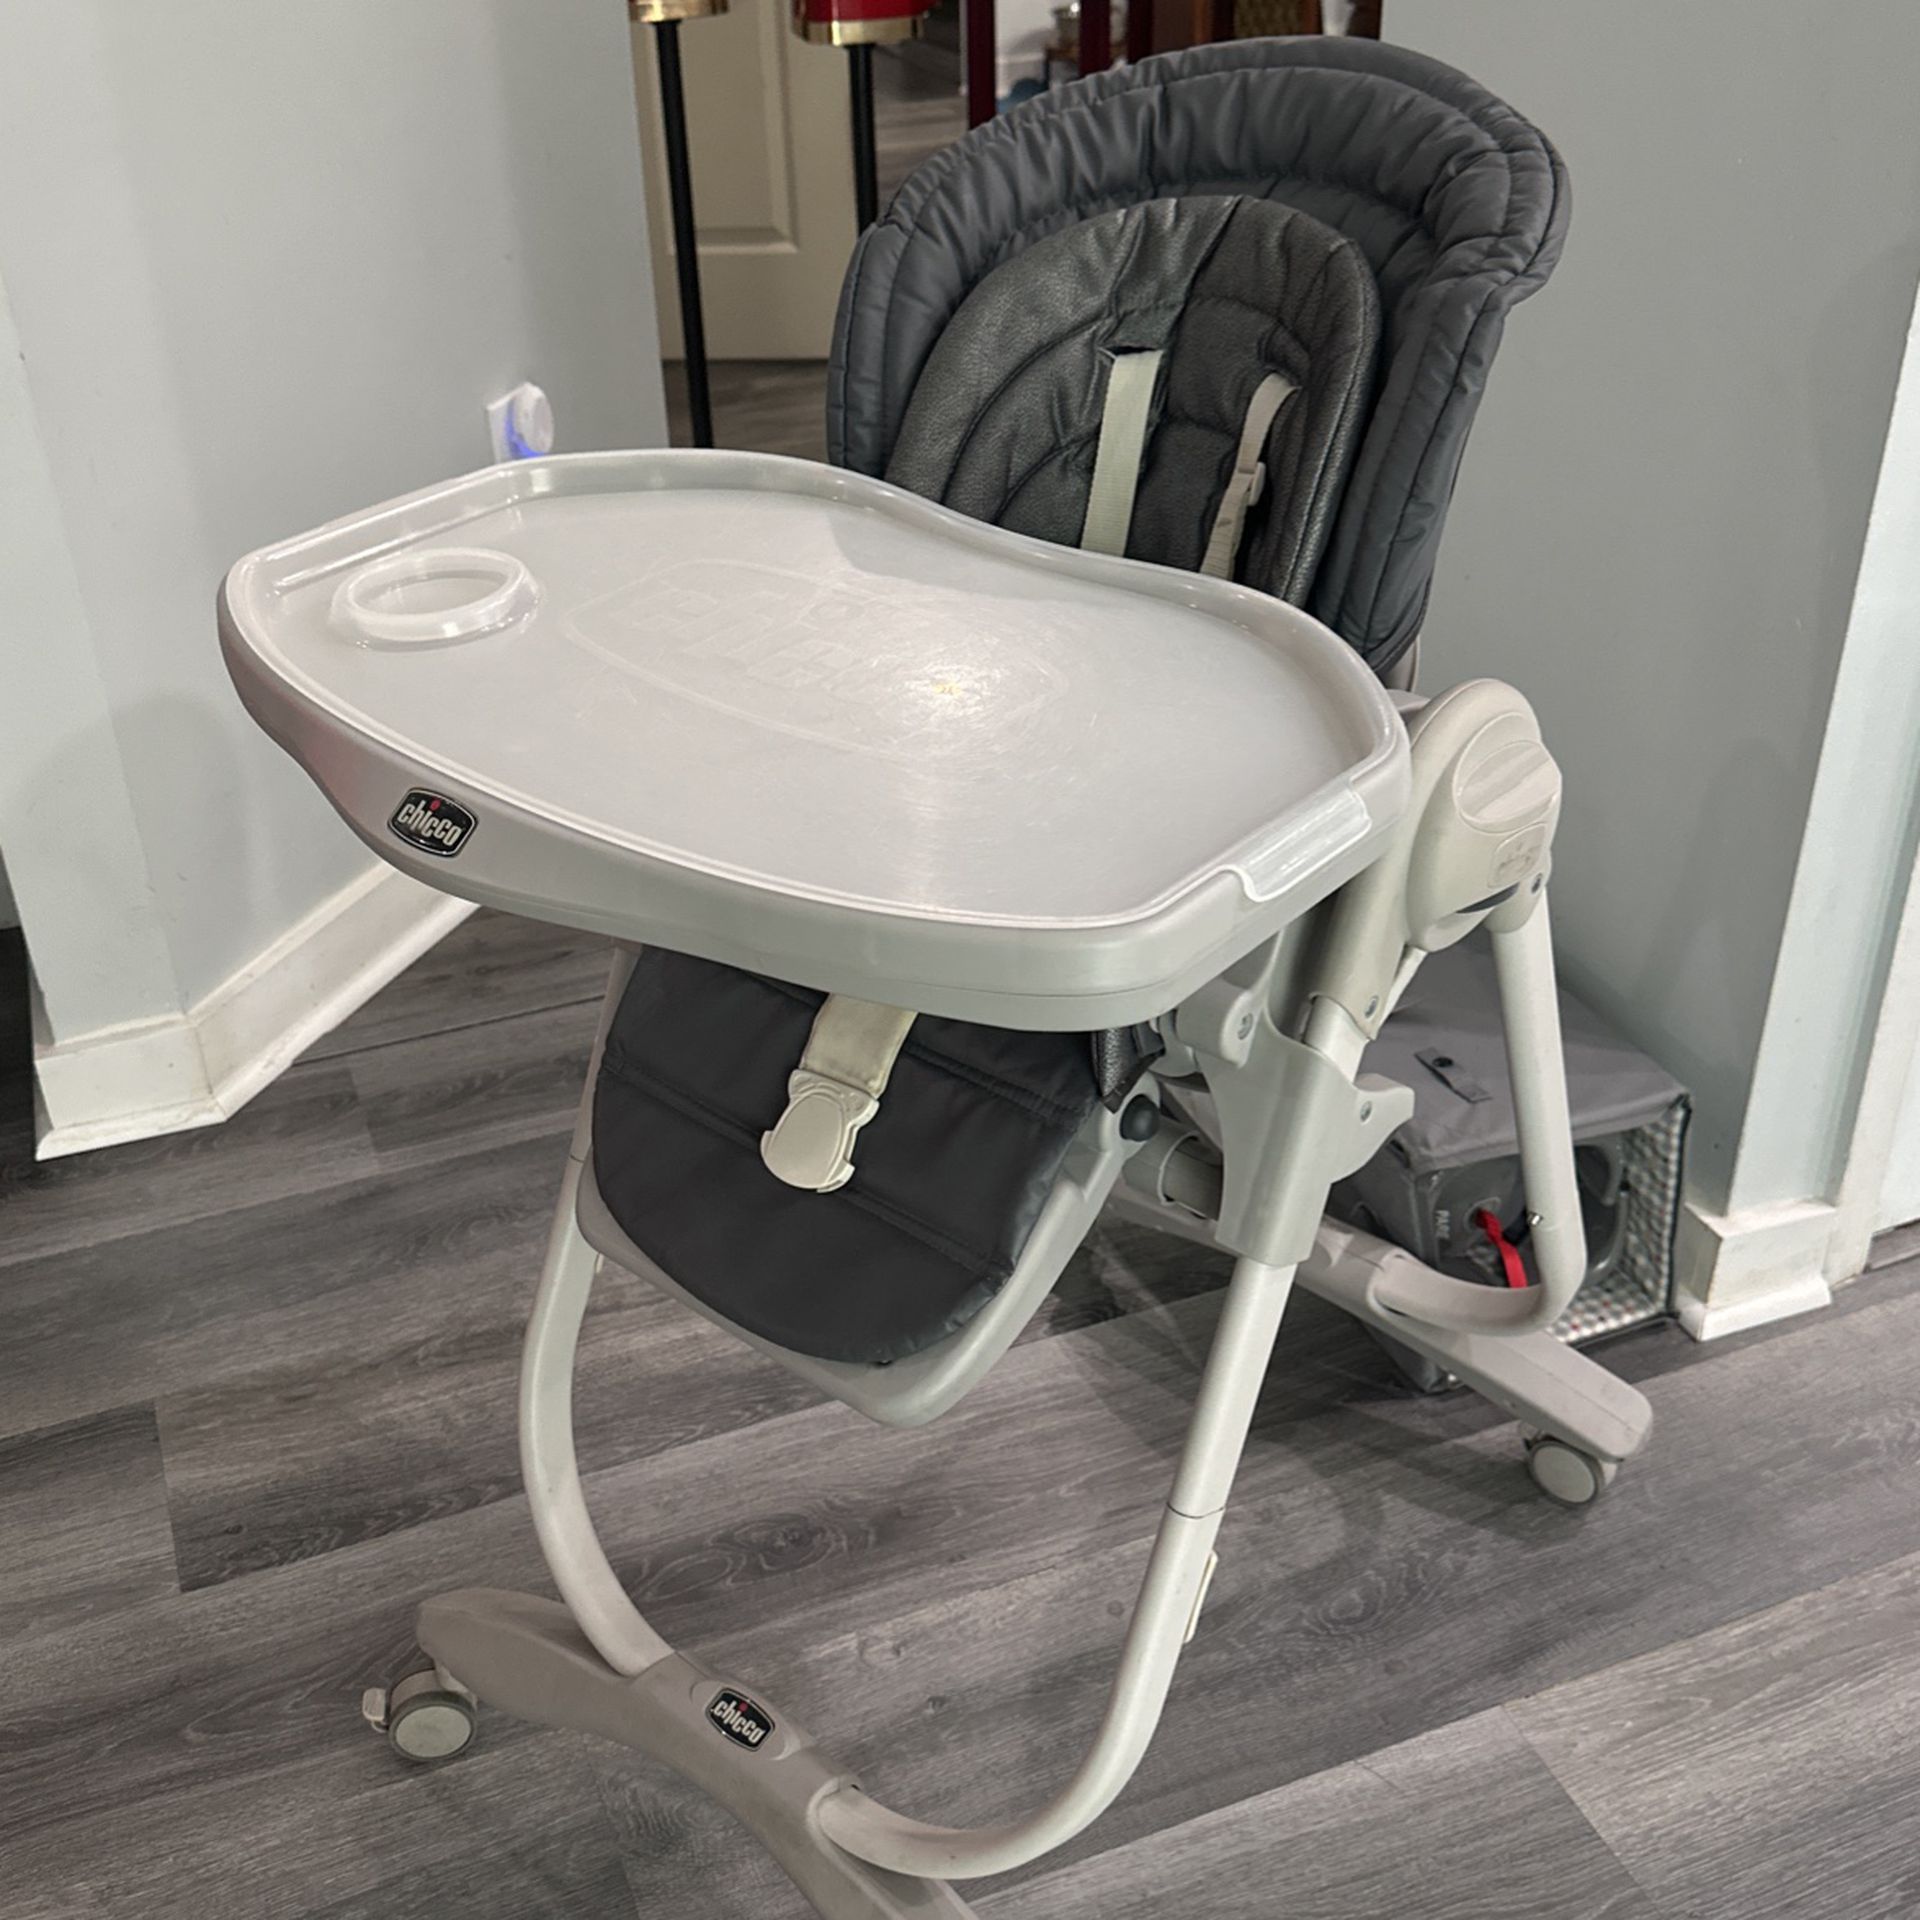 High chair By Chicco